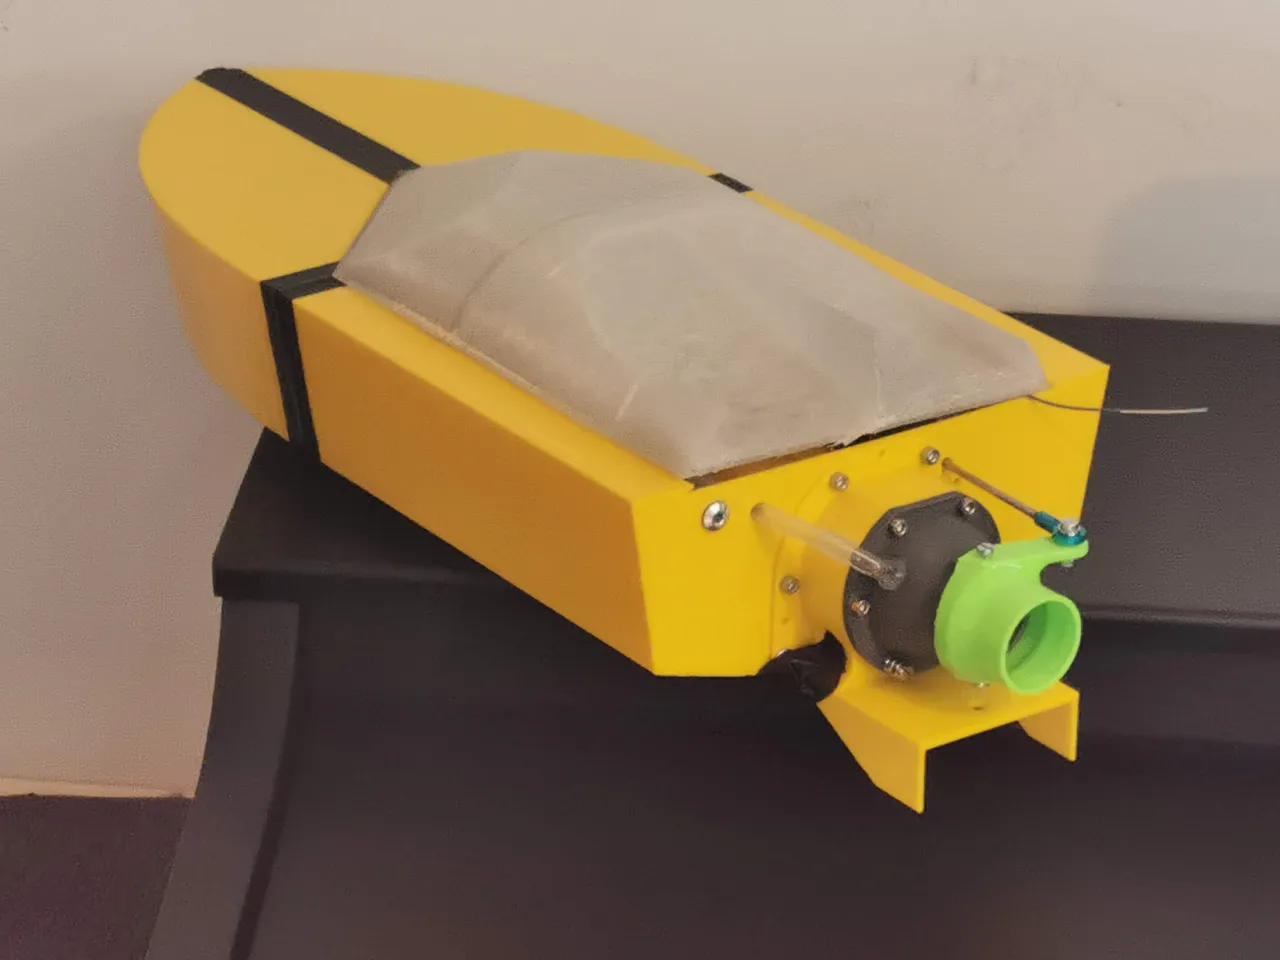 3D Printed Rc Jet Boat: Endless Possibilities for 3D Printed RC Jet Boats